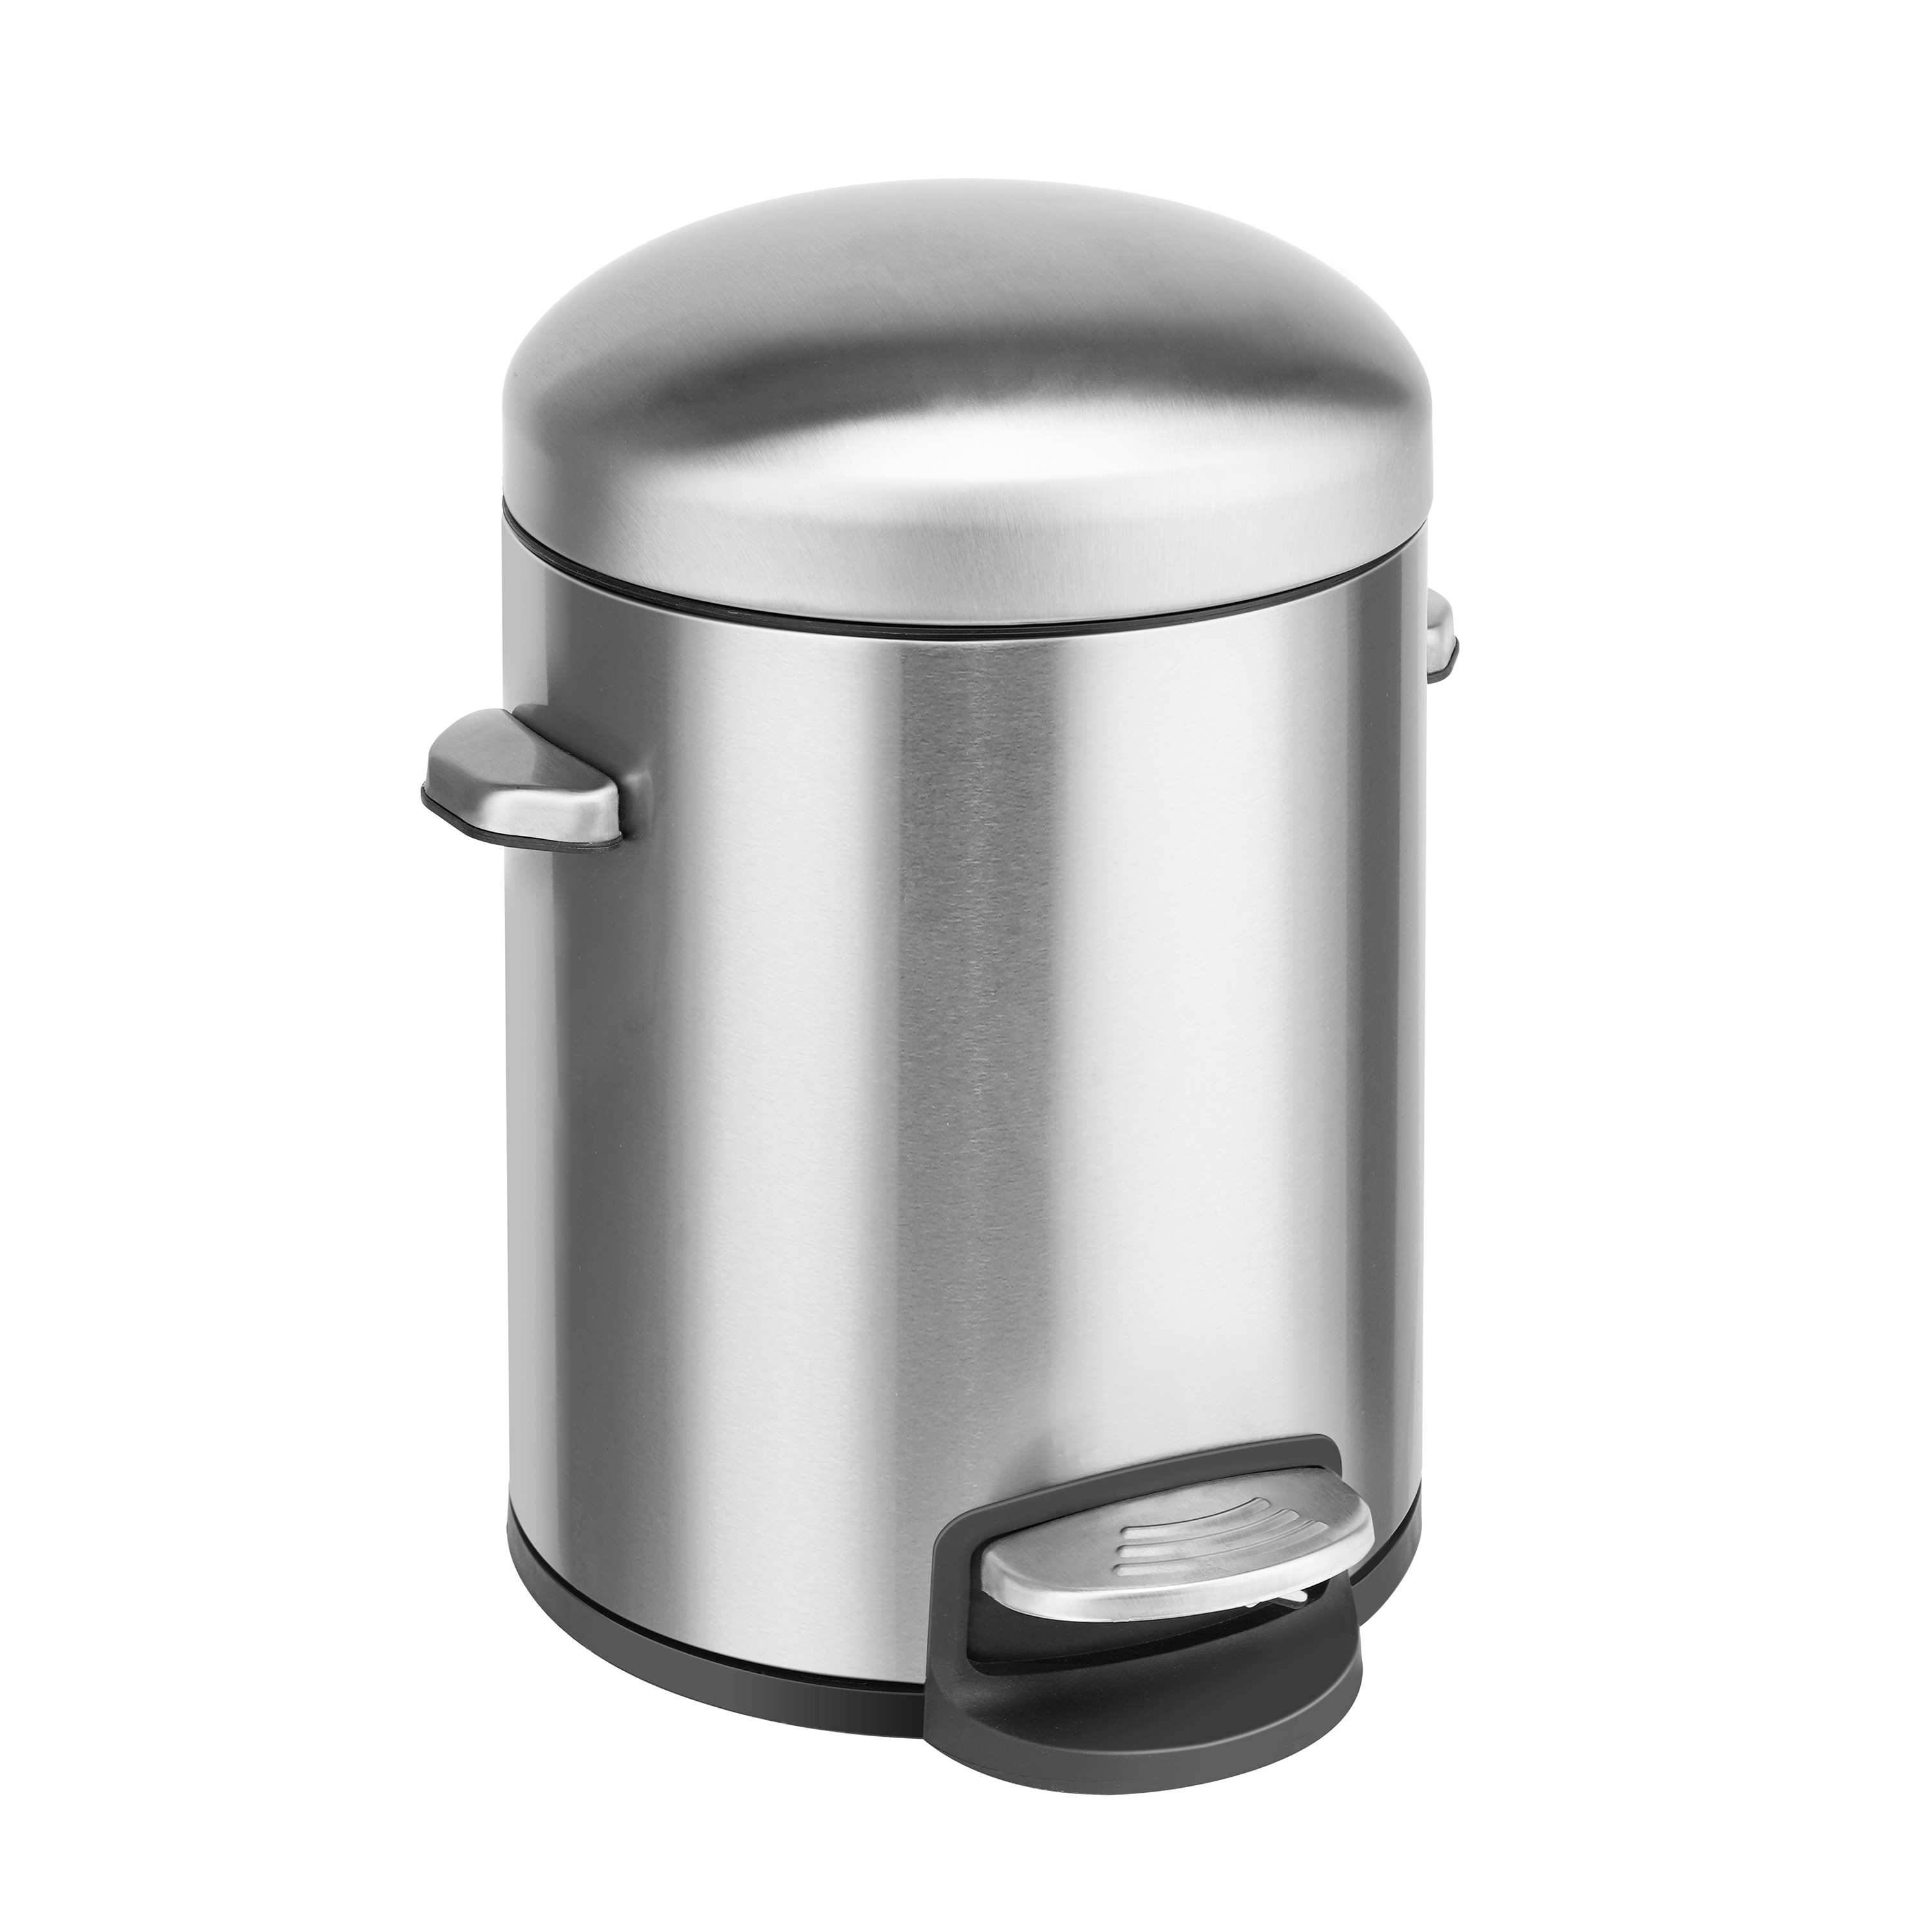 https://ak1.ostkcdn.com/images/products/is/images/direct/89c4cf9bc910fff2e2a2d60a772222b77bf90f23/Innovaze-1.32-Gallon-Stainless-Steel-Round-Step-on-Bathroom-and-Office-Trash-Can.jpg